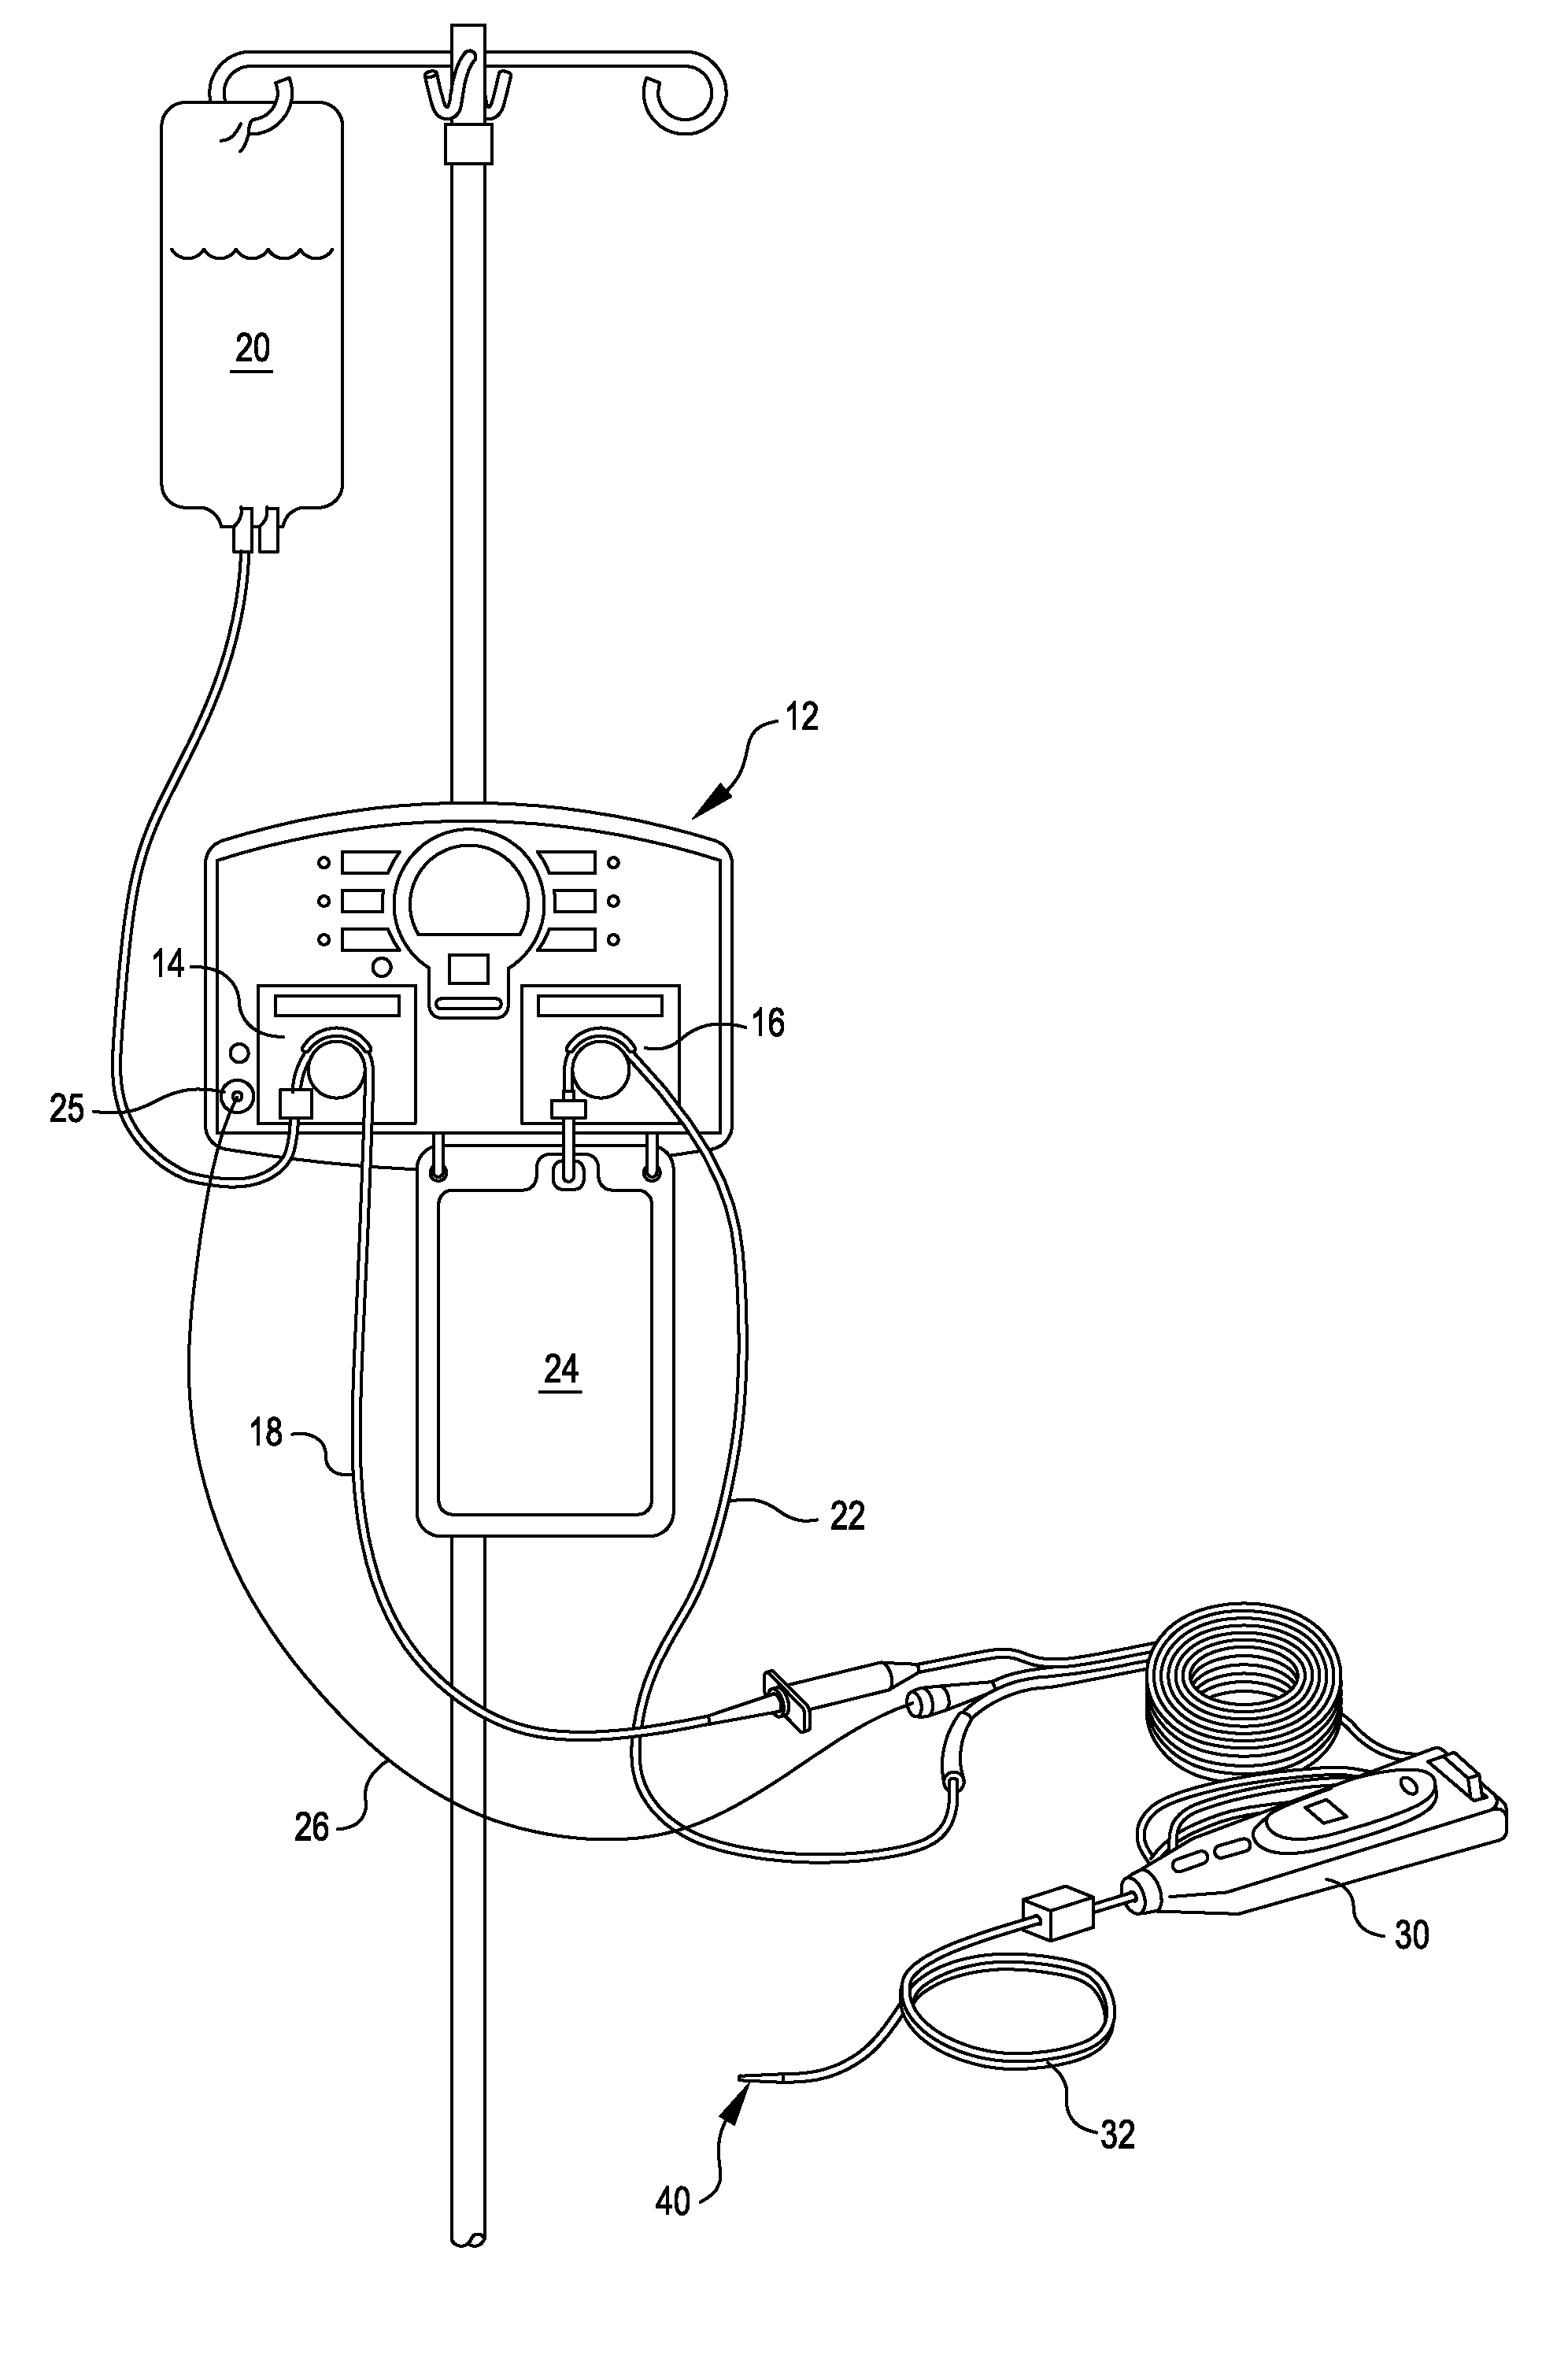 Interventional catheters incorporating aspiration and/or infusion systems